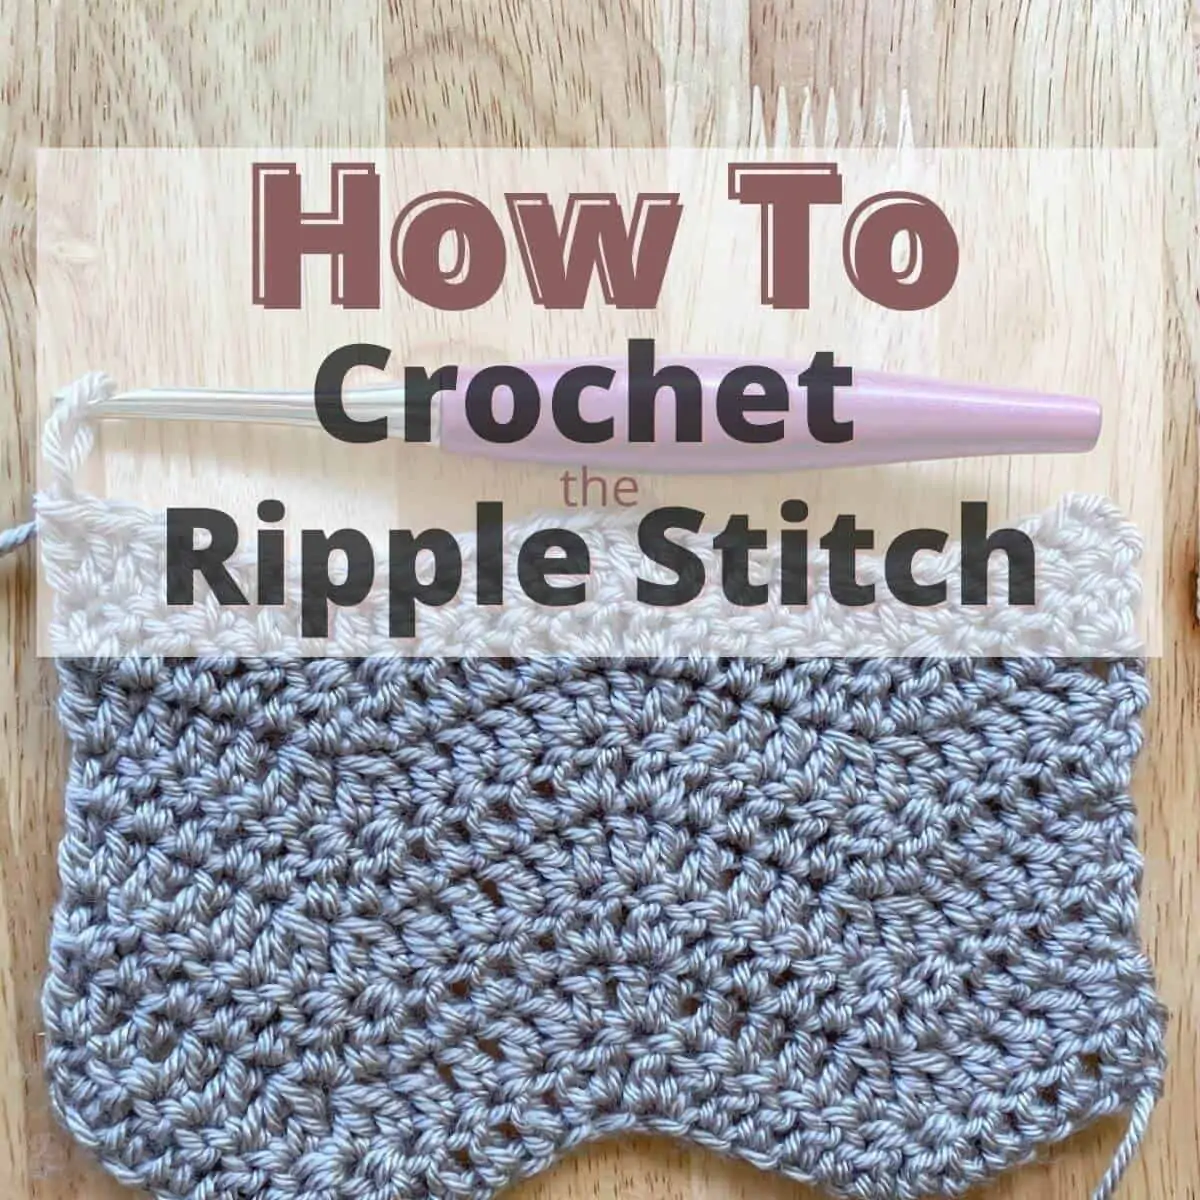 text learn how to crochet the ripple stitch overlaid a swatch of crochet ripple stitch